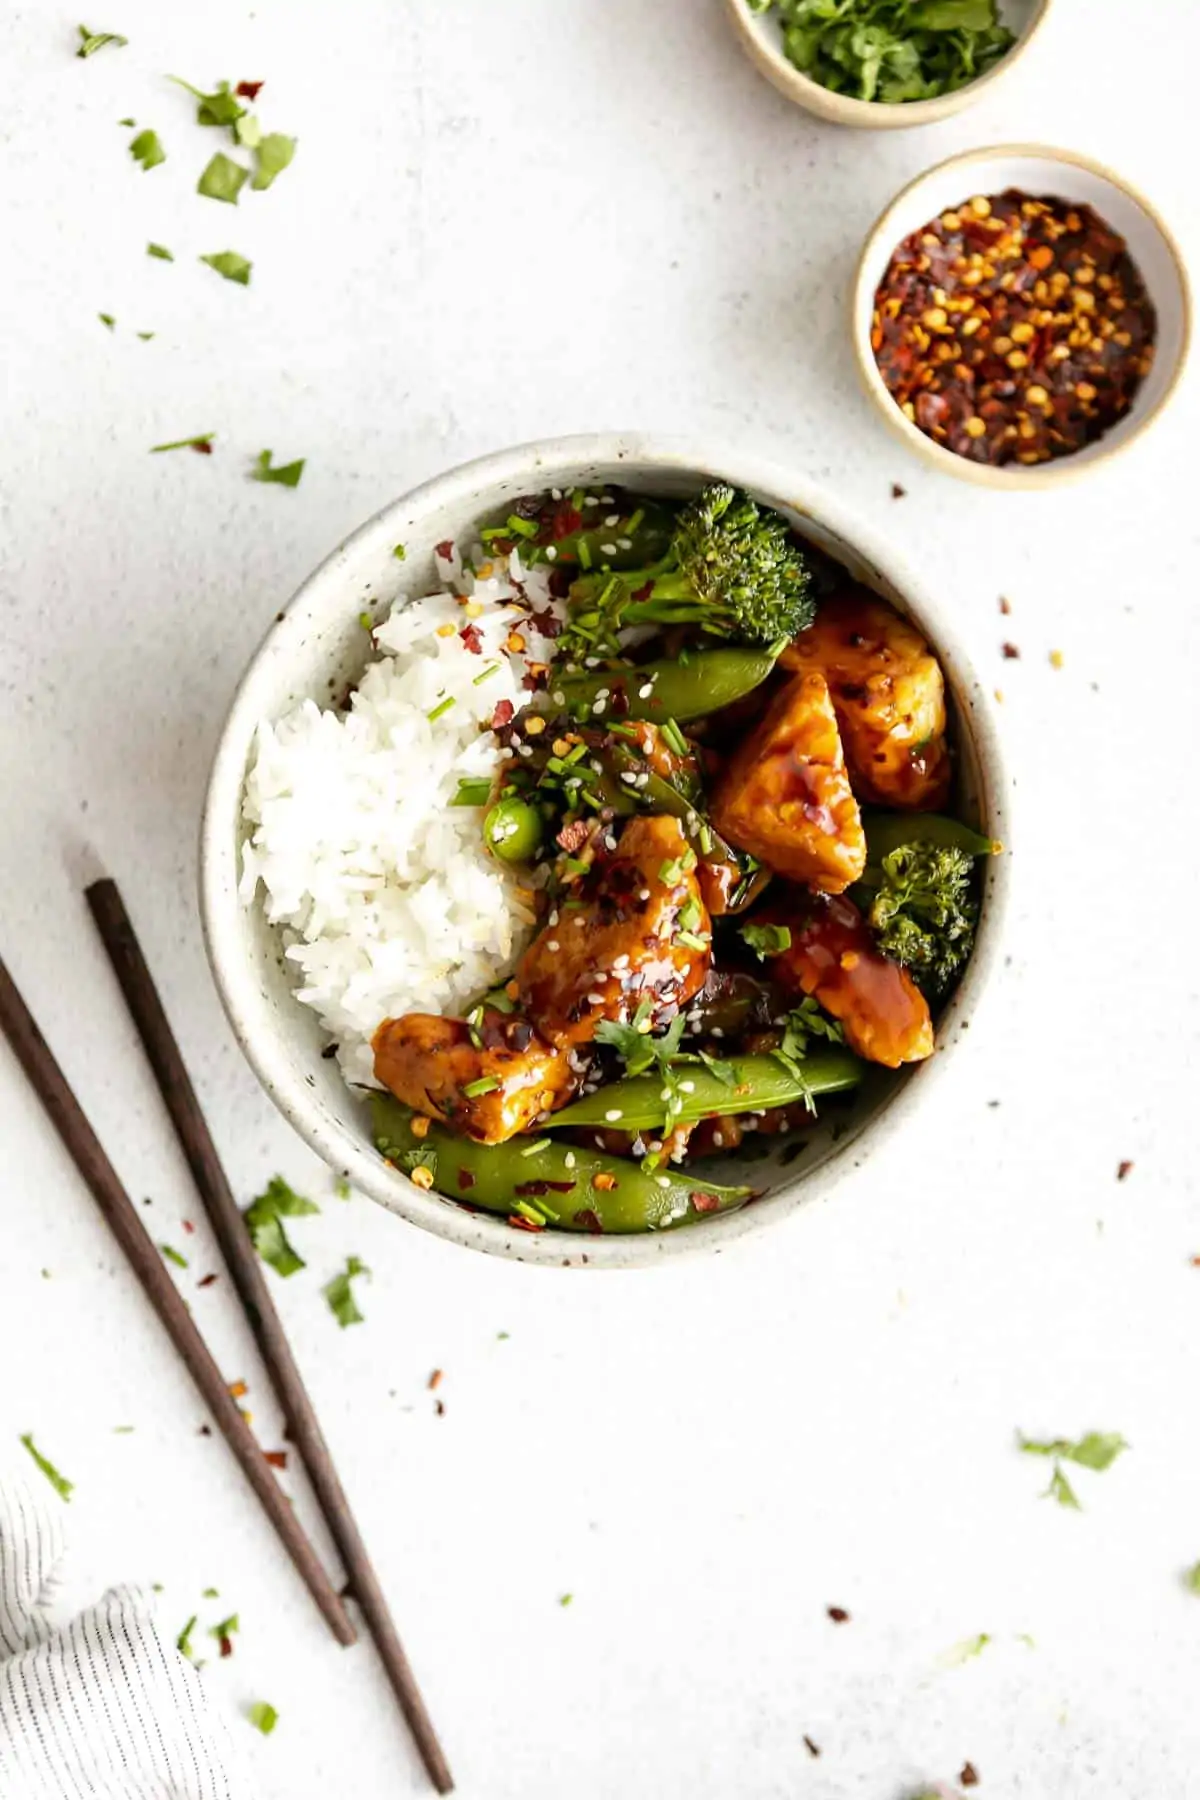 tempeh stir fry with broccoli and rice in a bowl